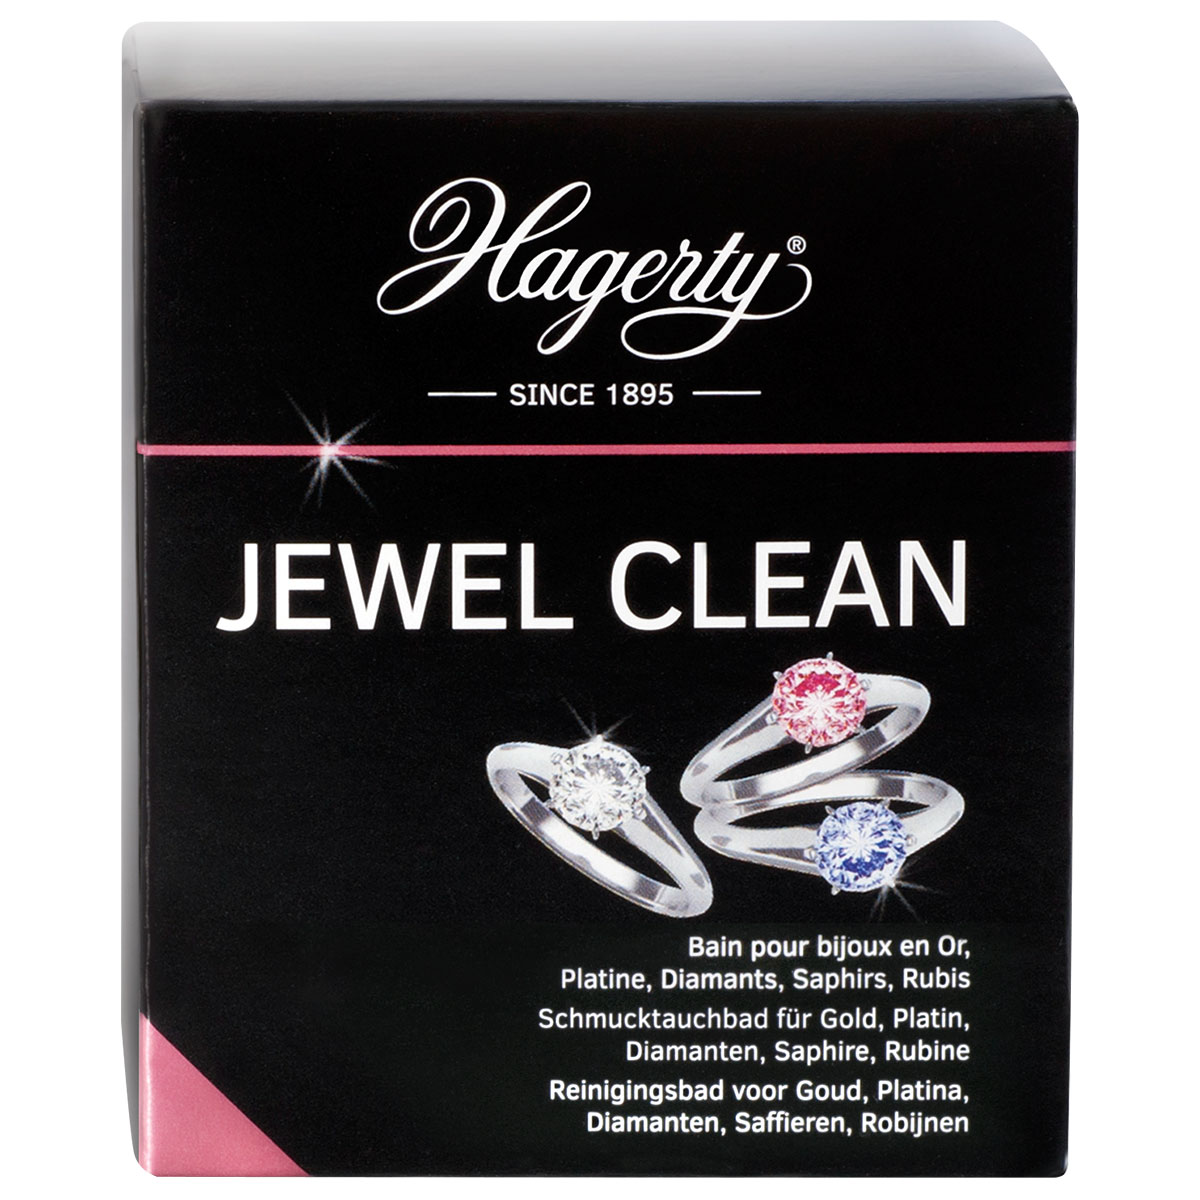 Hagerty Jewel Clean, dipping bath for jewels, 170 ml